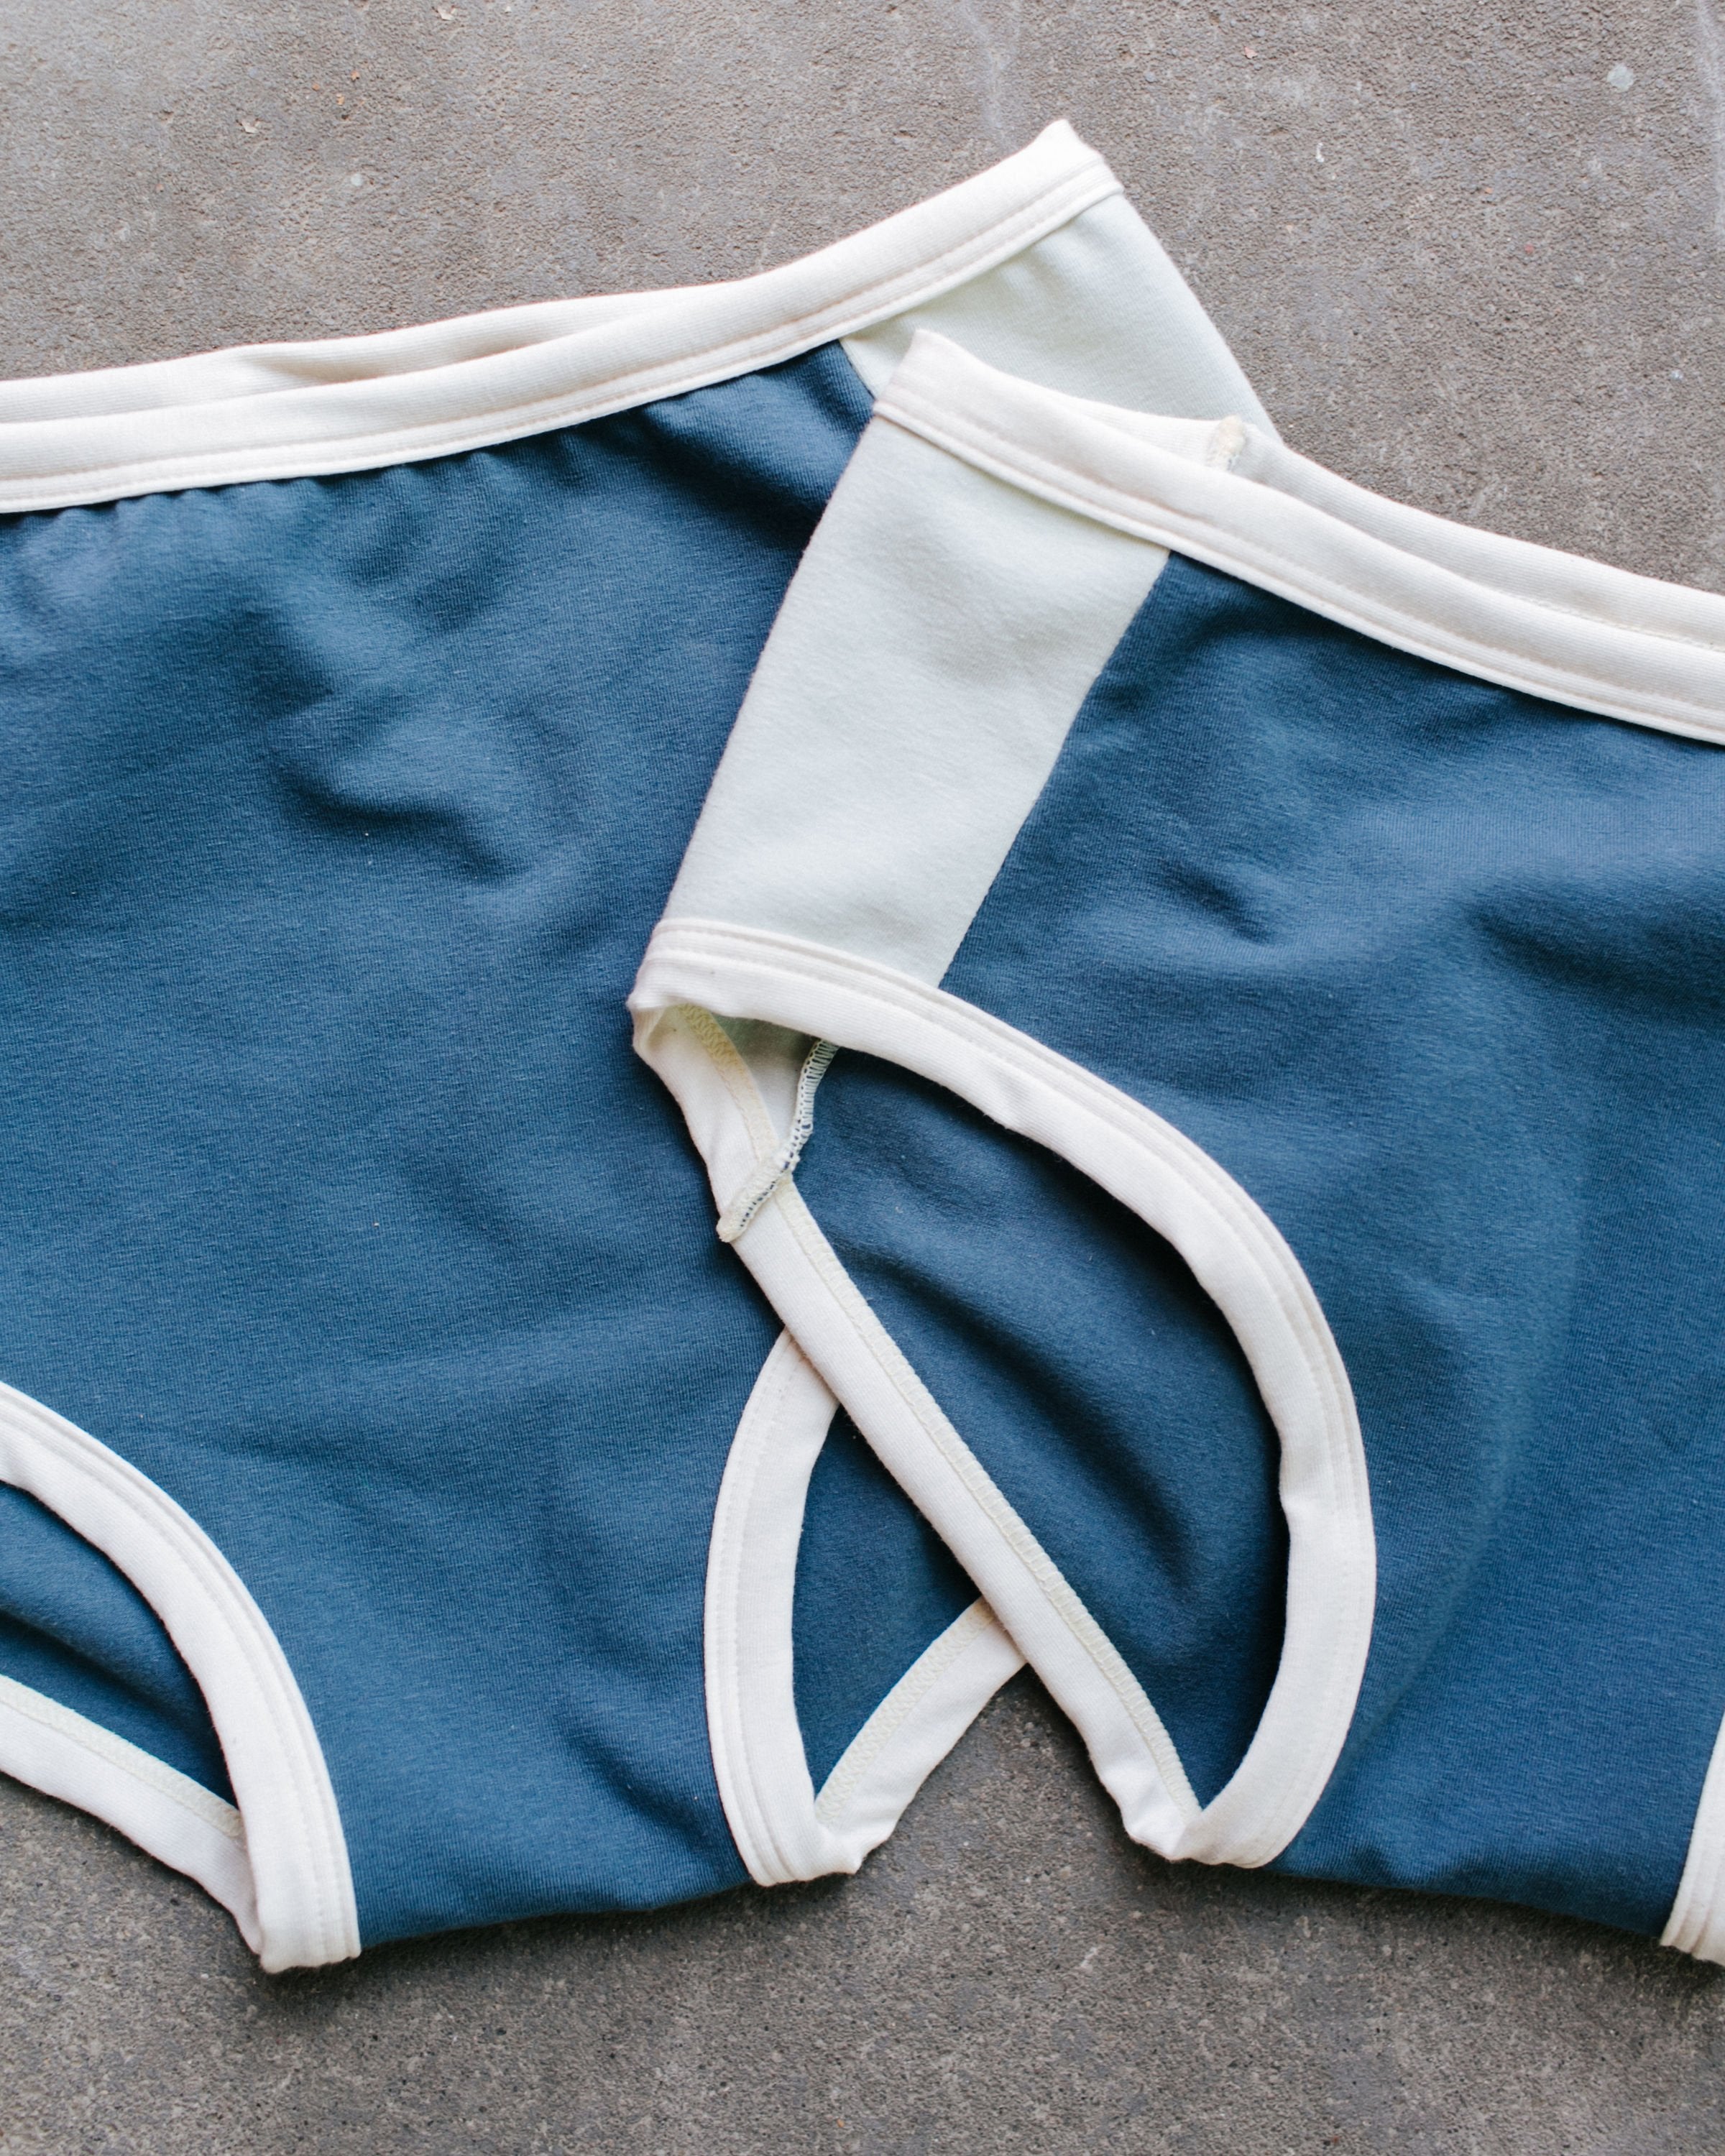 Close up of Thunderpants organic cotton Original style underwear and Hipster style underwear with Stormy Blue front and back panels and Dried Sage side panels.